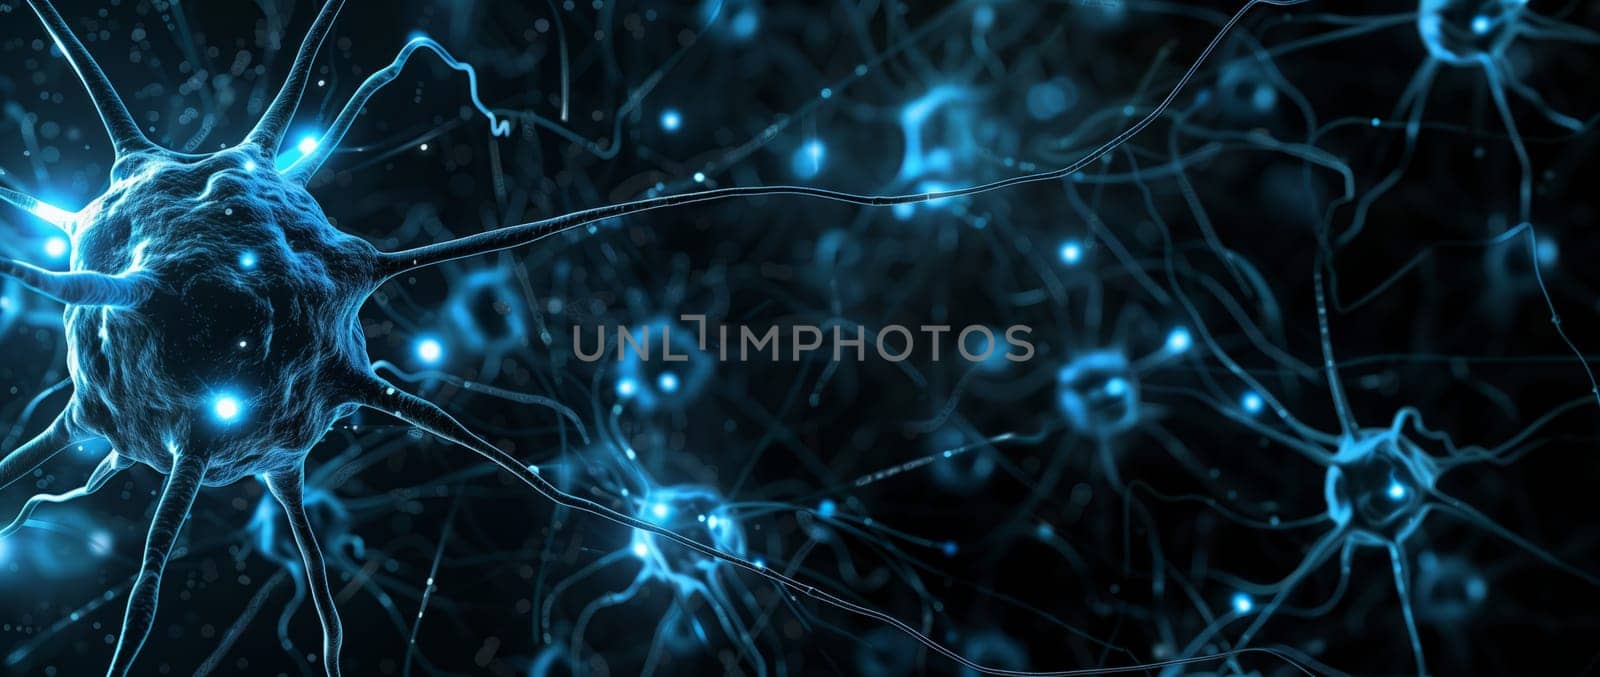 Electric blue network of nerve cells resembles a cosmic pattern in space by richwolf